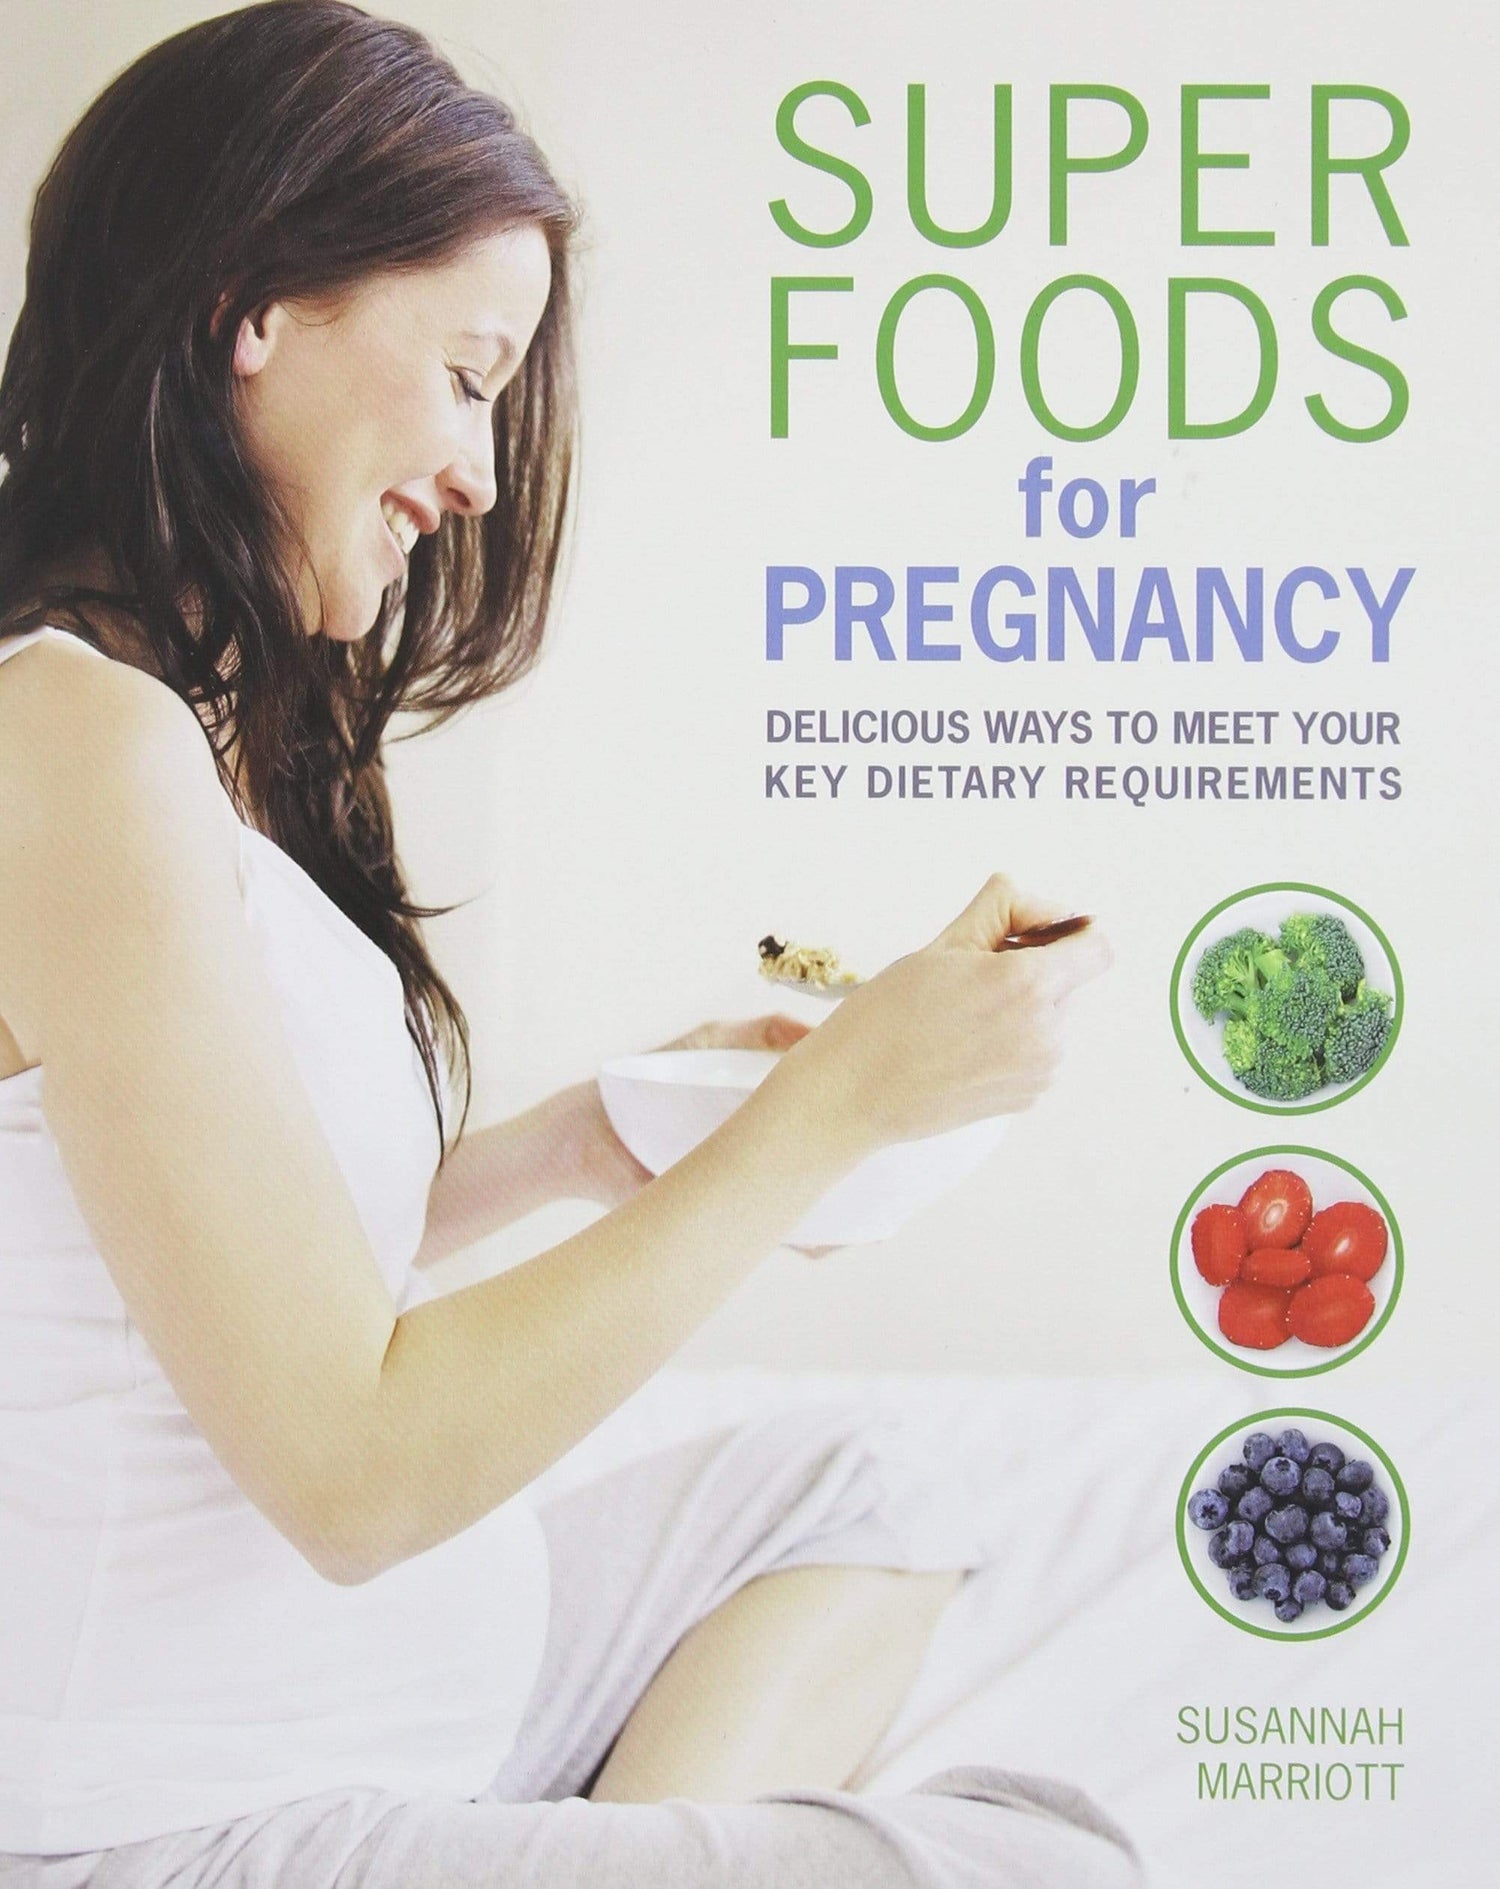 Super Foods for Pregnancy: Delicious ways to meet your key dietary requirements